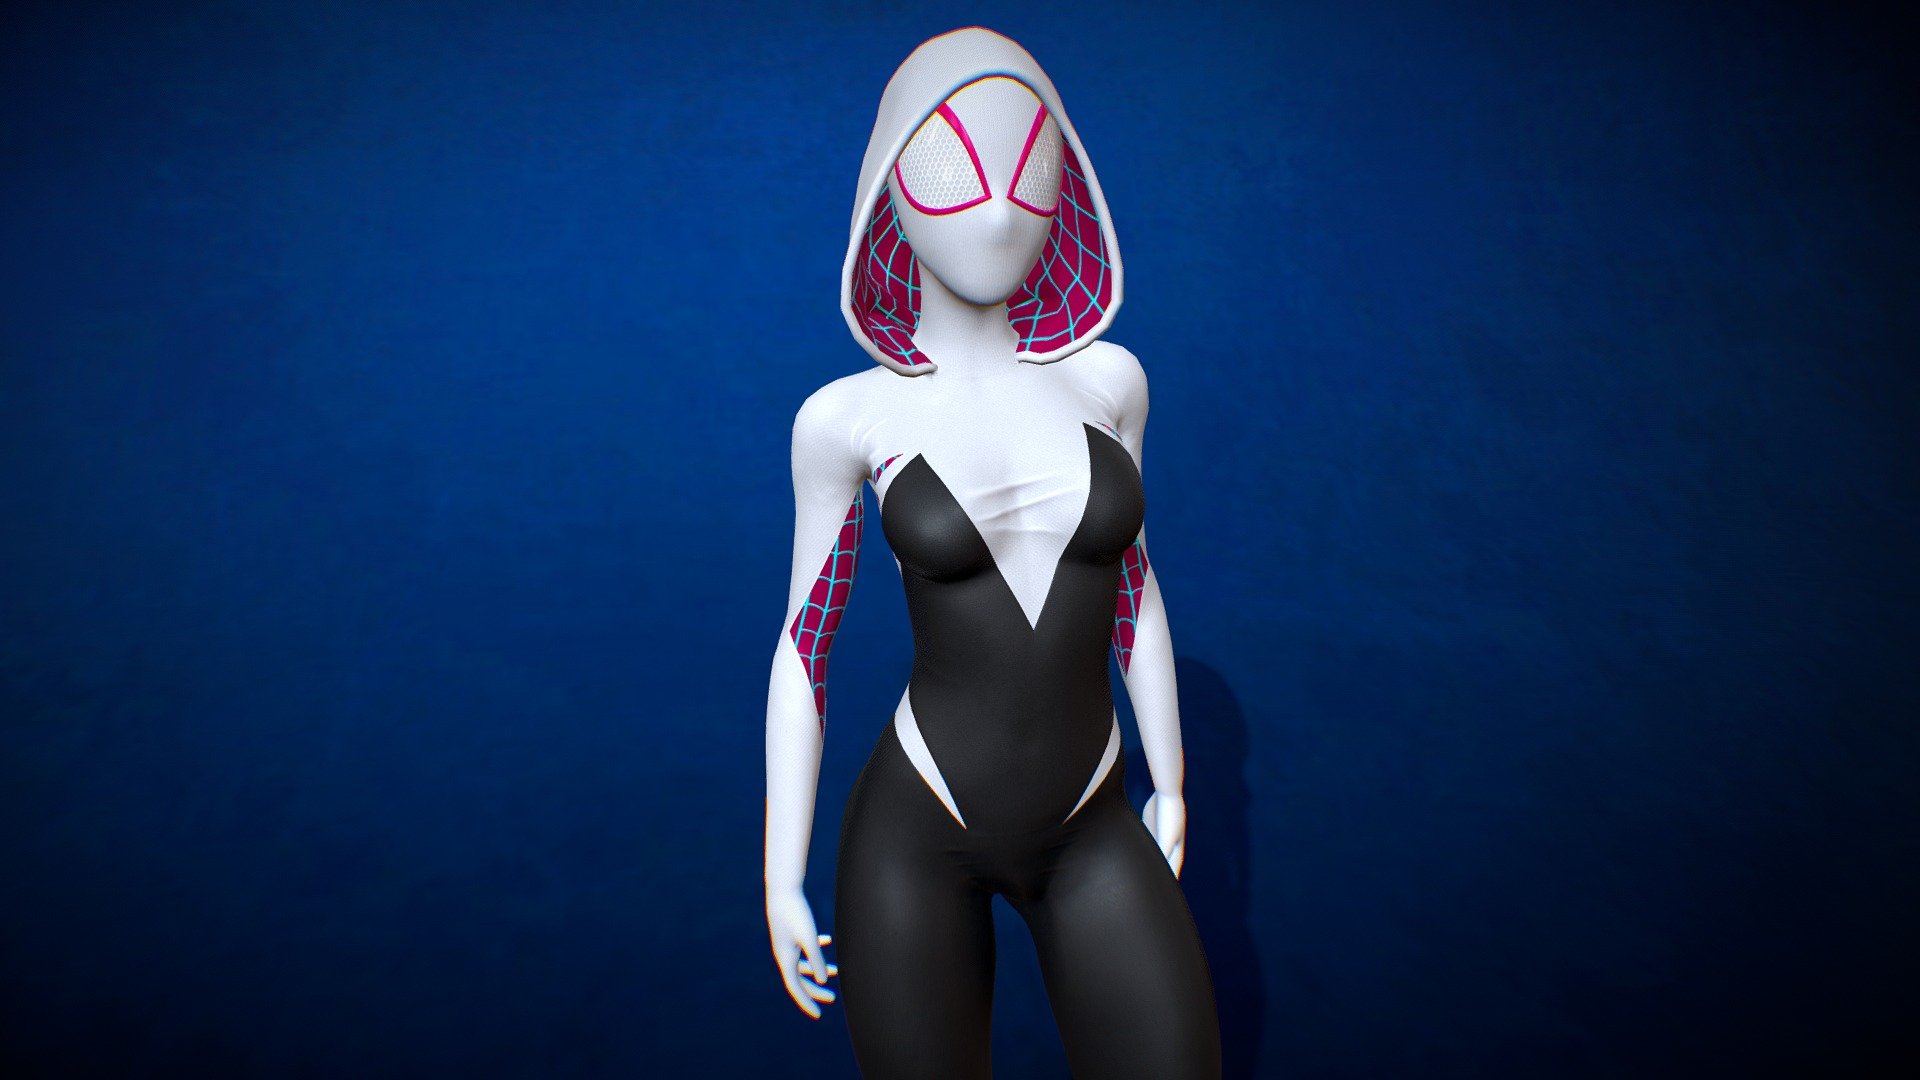 Spider-Gwen is a comic books character published by Marvel Comics.




Model was made on Maya, Zbrush, substance painter and Blender.

Inspired by Spiderman into the spider verse gwen stacy suit.

The model has a Gwen stacy spider-woman suit.

High quality texture work.

The model comes with complete 4k textures and Blender, FBX And OBJ file formats

The model has 6 materials 1 material is a glass material without any map and other materials contains 5 maps Basecolor, Roughness, Metalness, Normal and Ao

All textures and materials are included and mapped. (4k resoulutions)

No special plugin needed to open scene

The model can be rigg easily
 - Spider_Gwen - Buy Royalty Free 3D model by AFSHAN ALI (@Aliflex) 3d model